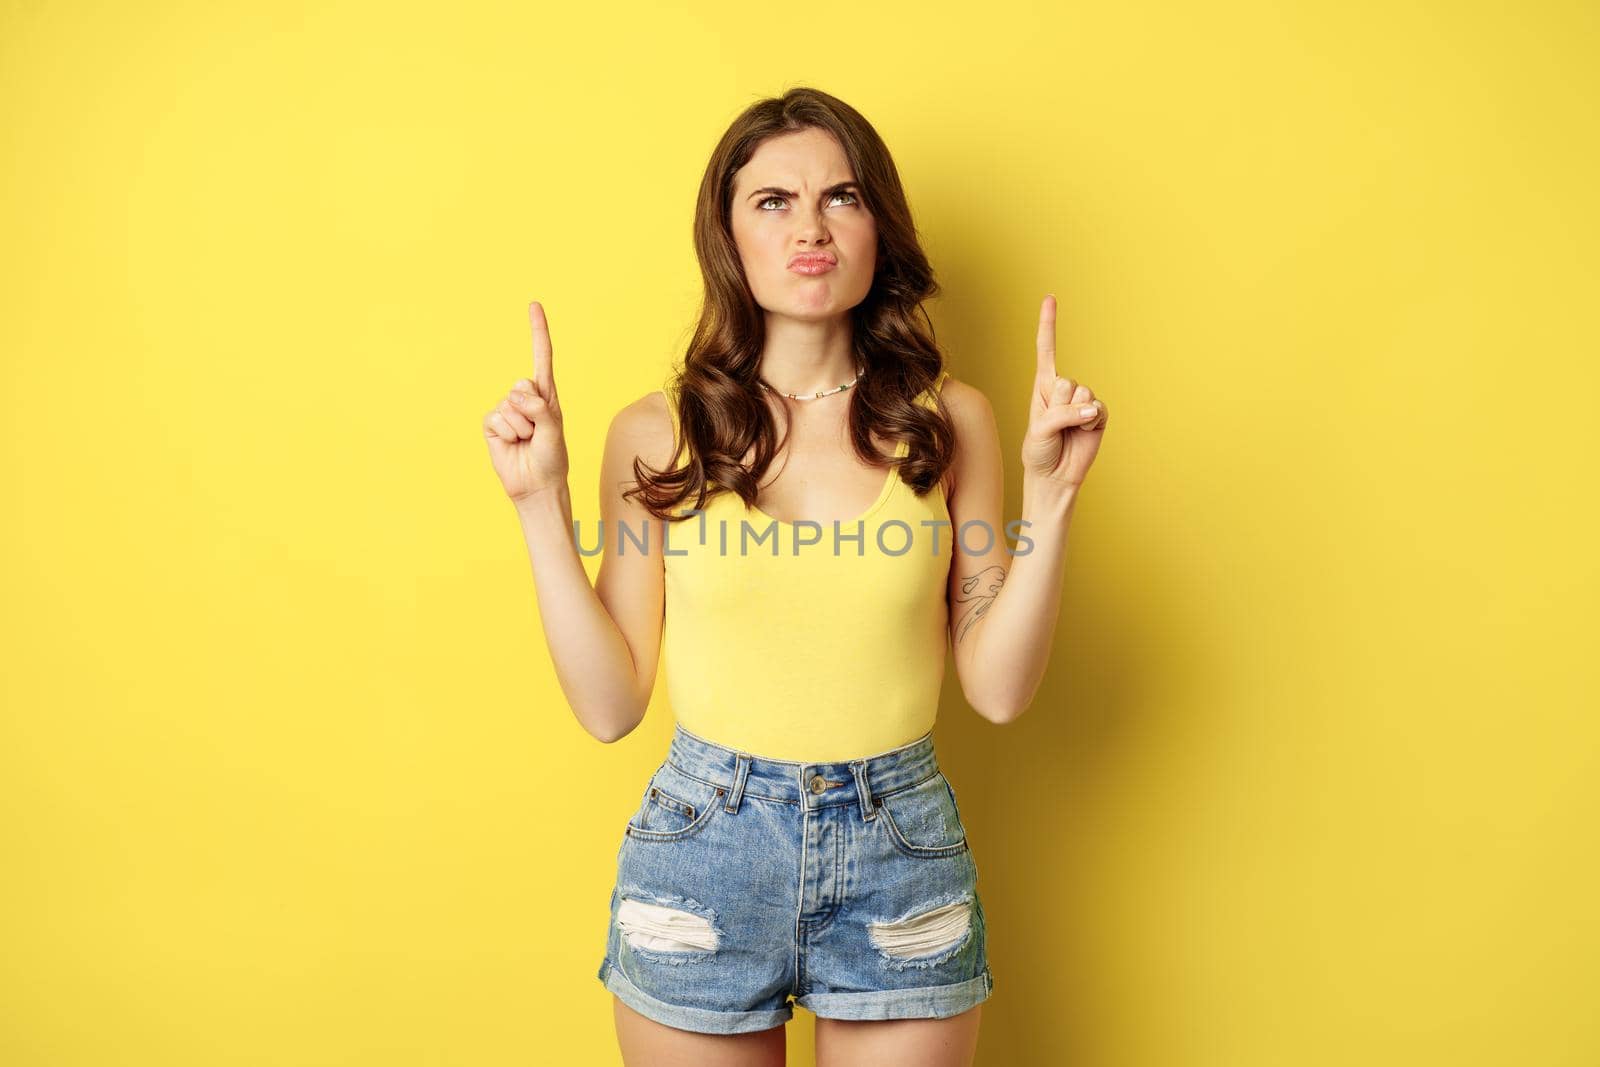 Disappointed girl grimacing, pointing fingers, showing logo, promo offer, banner or logo, standing over yellow background.